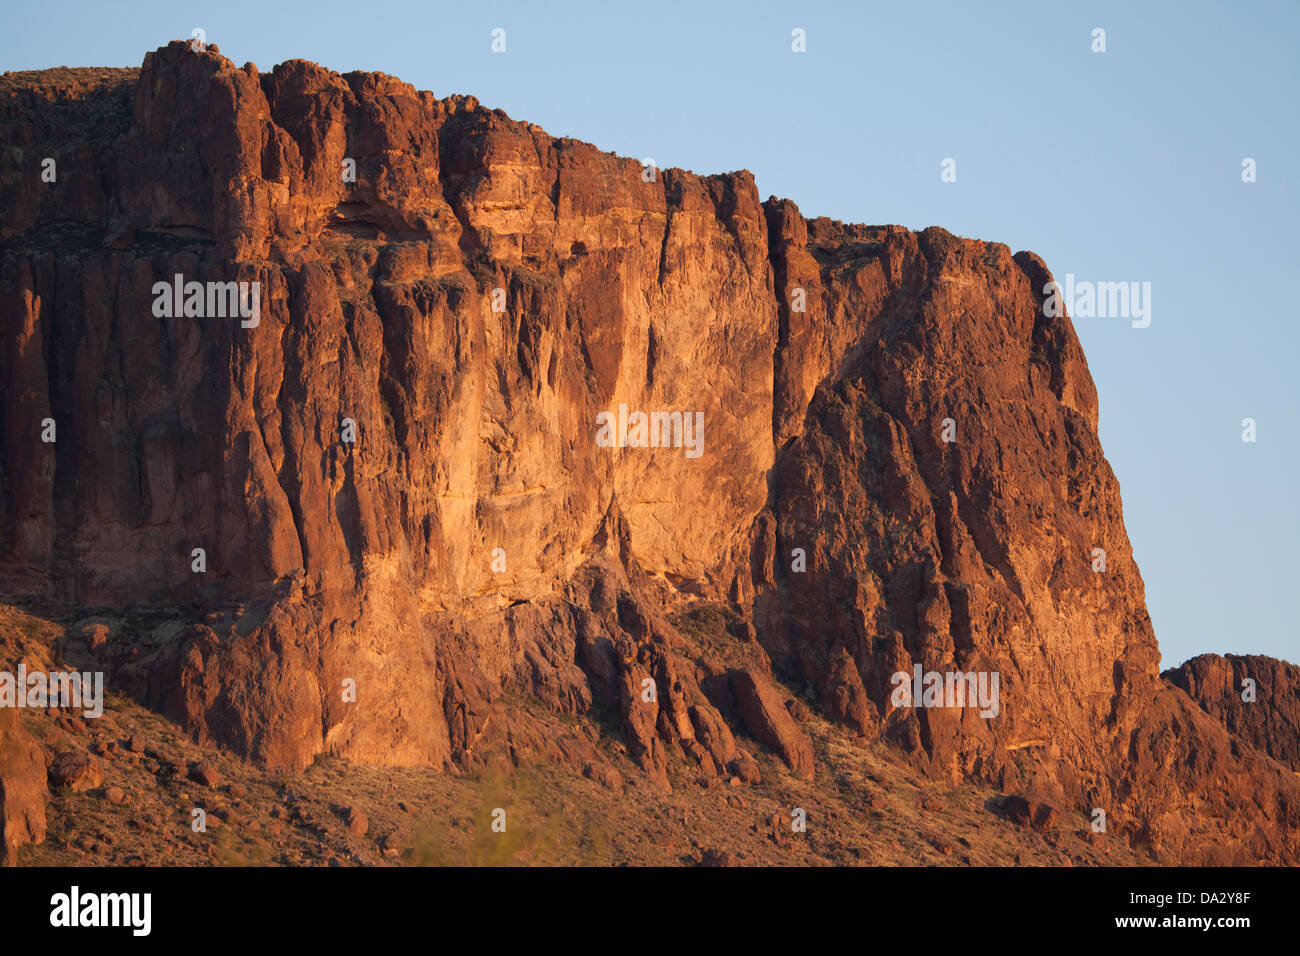 Cliffs in the Superstition Mountains as seen from Lost Dutchman State Park in Apache Junction, Arizona. Stock Photo